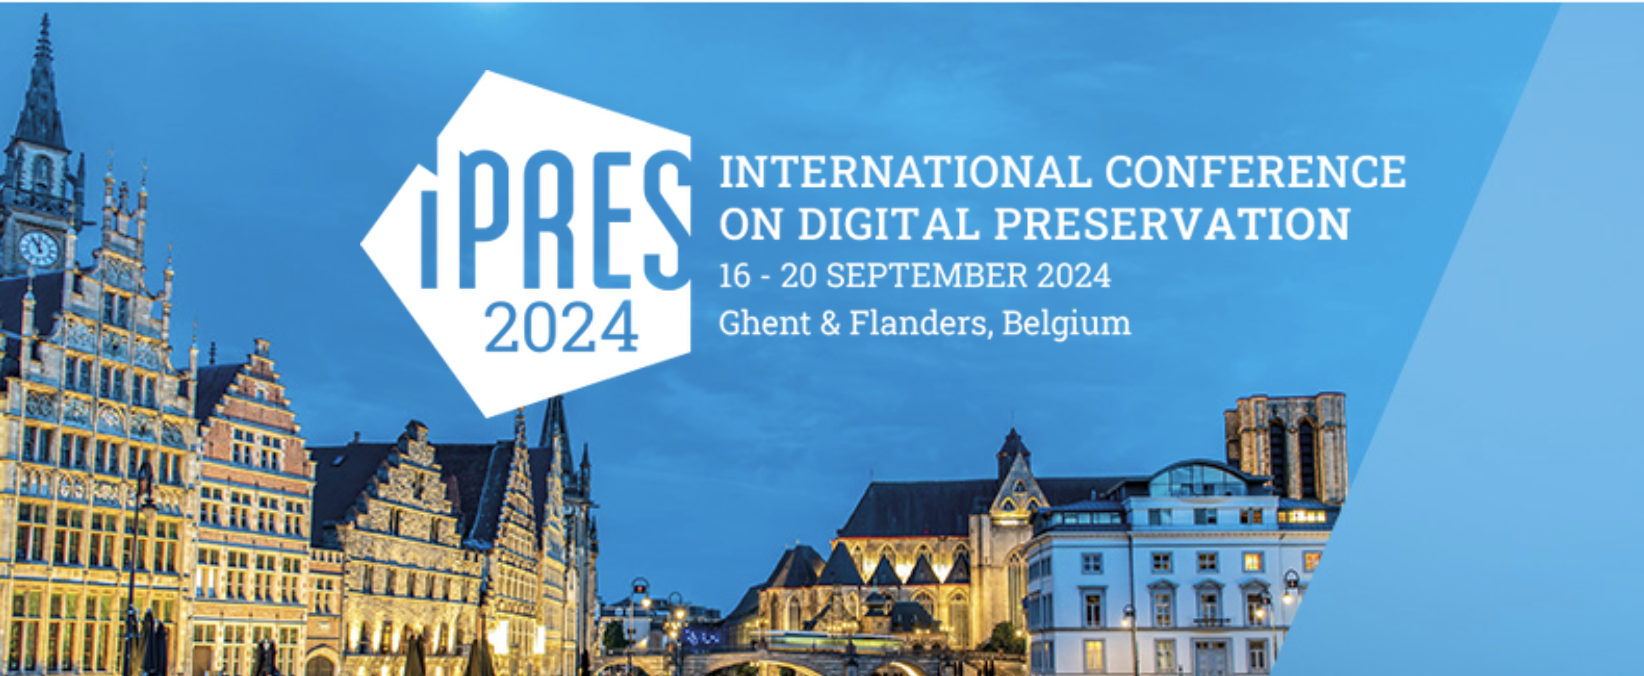 iPres 2024, international conference on digital preservation, 16th-20th september 2024, Ghent & Flanders, Belgium. Image of canals and buildings of Belgium below.